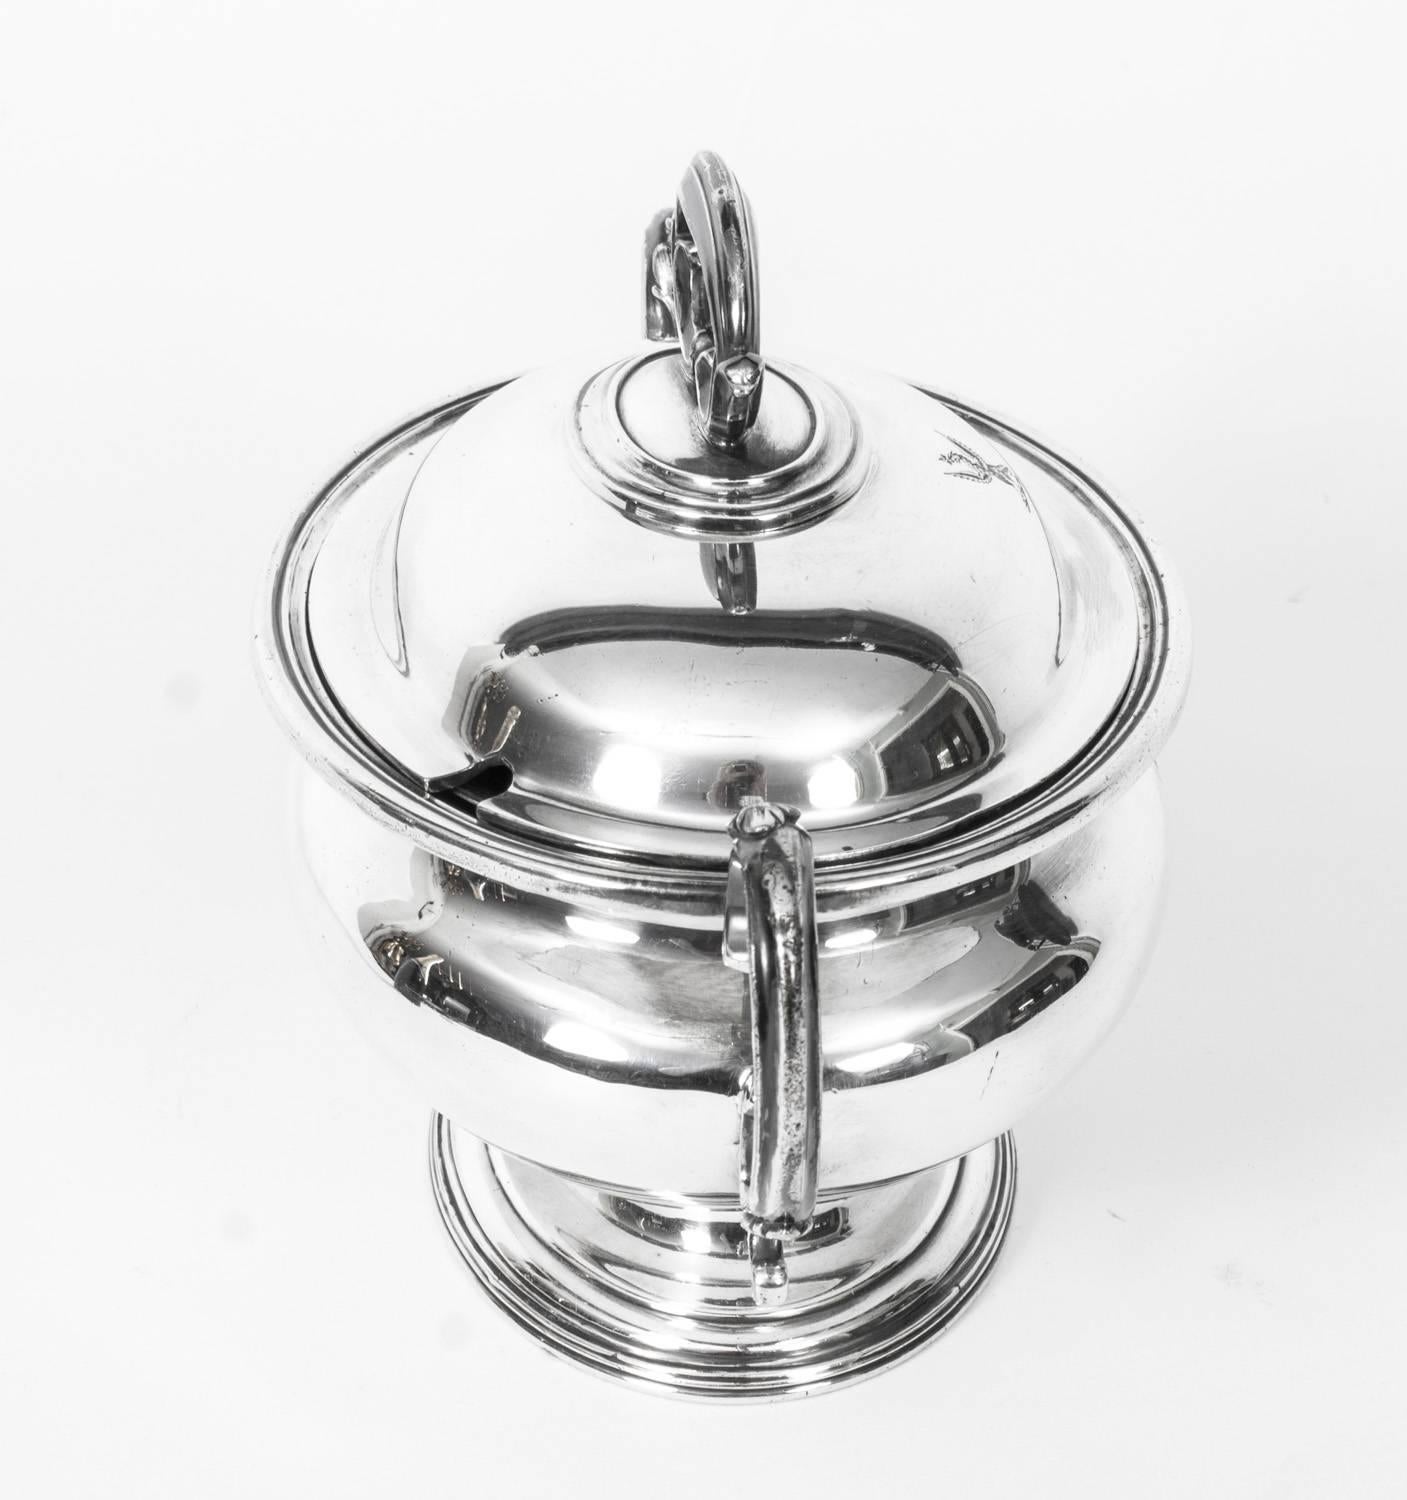 Silver Plate Antique Pair of Sauce Tureens, Covers and Liners Elkington, circa 1860